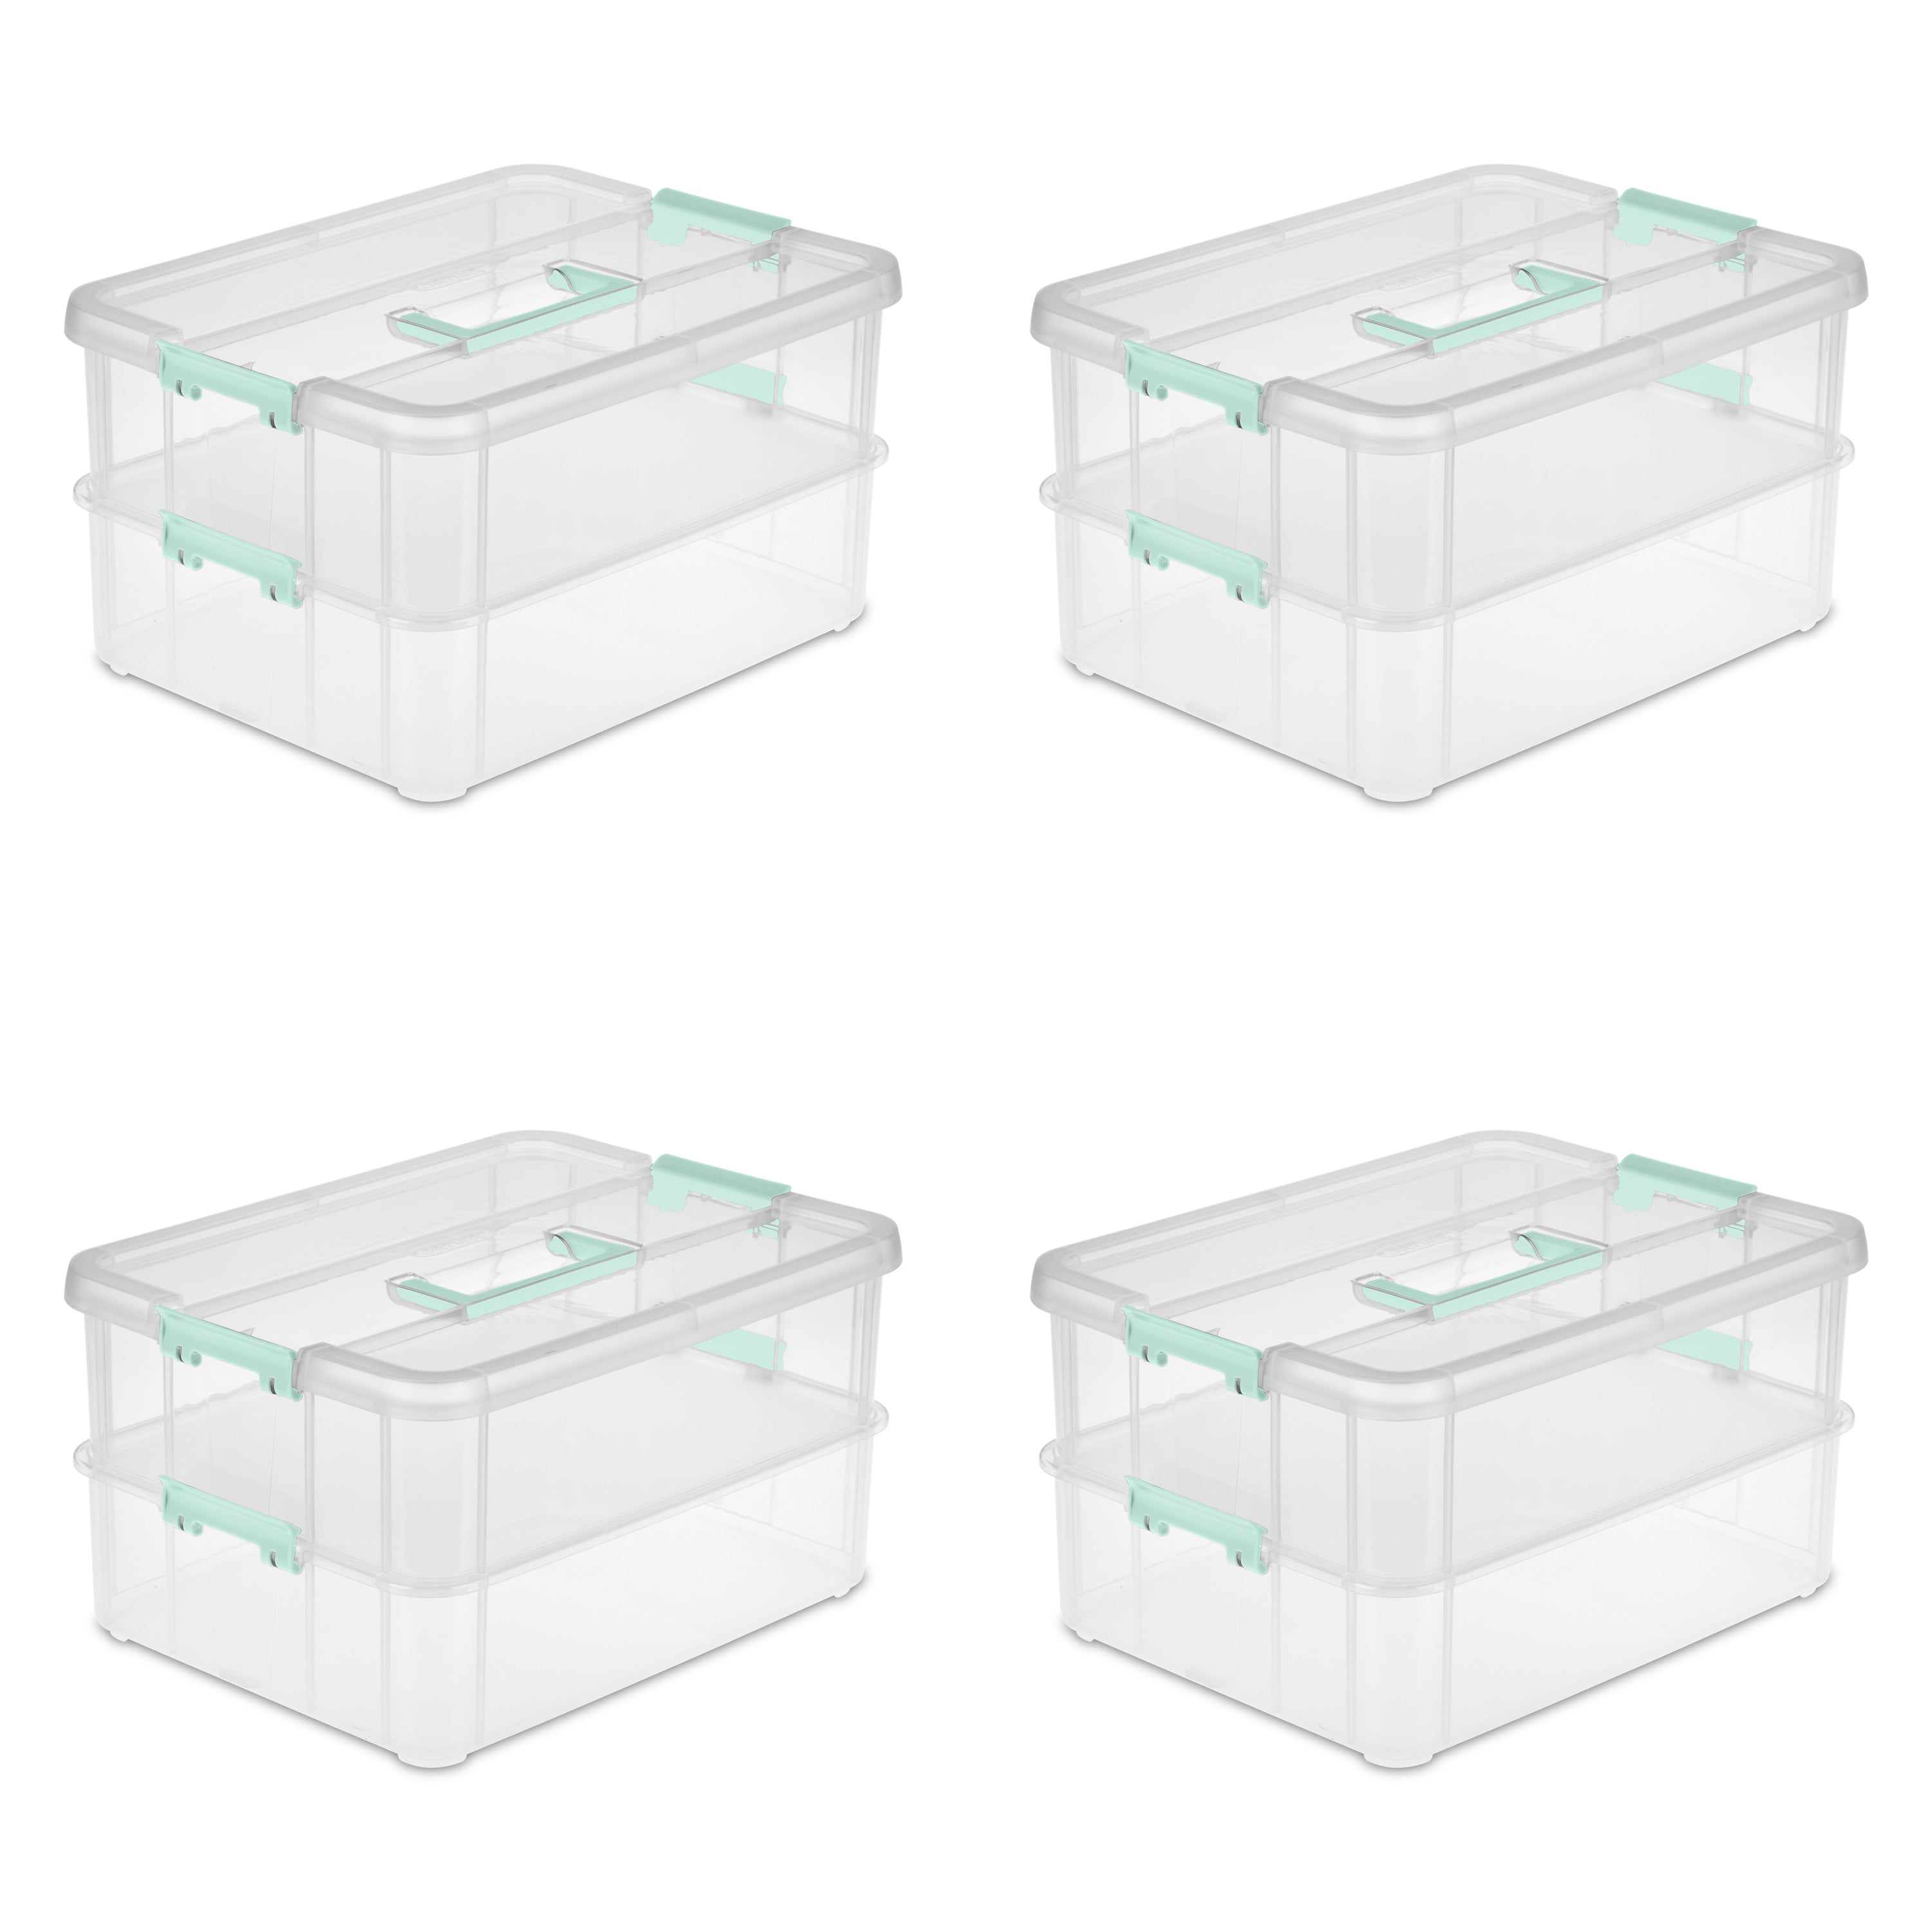 Sterilite Stack and Carry 2 Layer Handle Plastic Box Set & Reviews